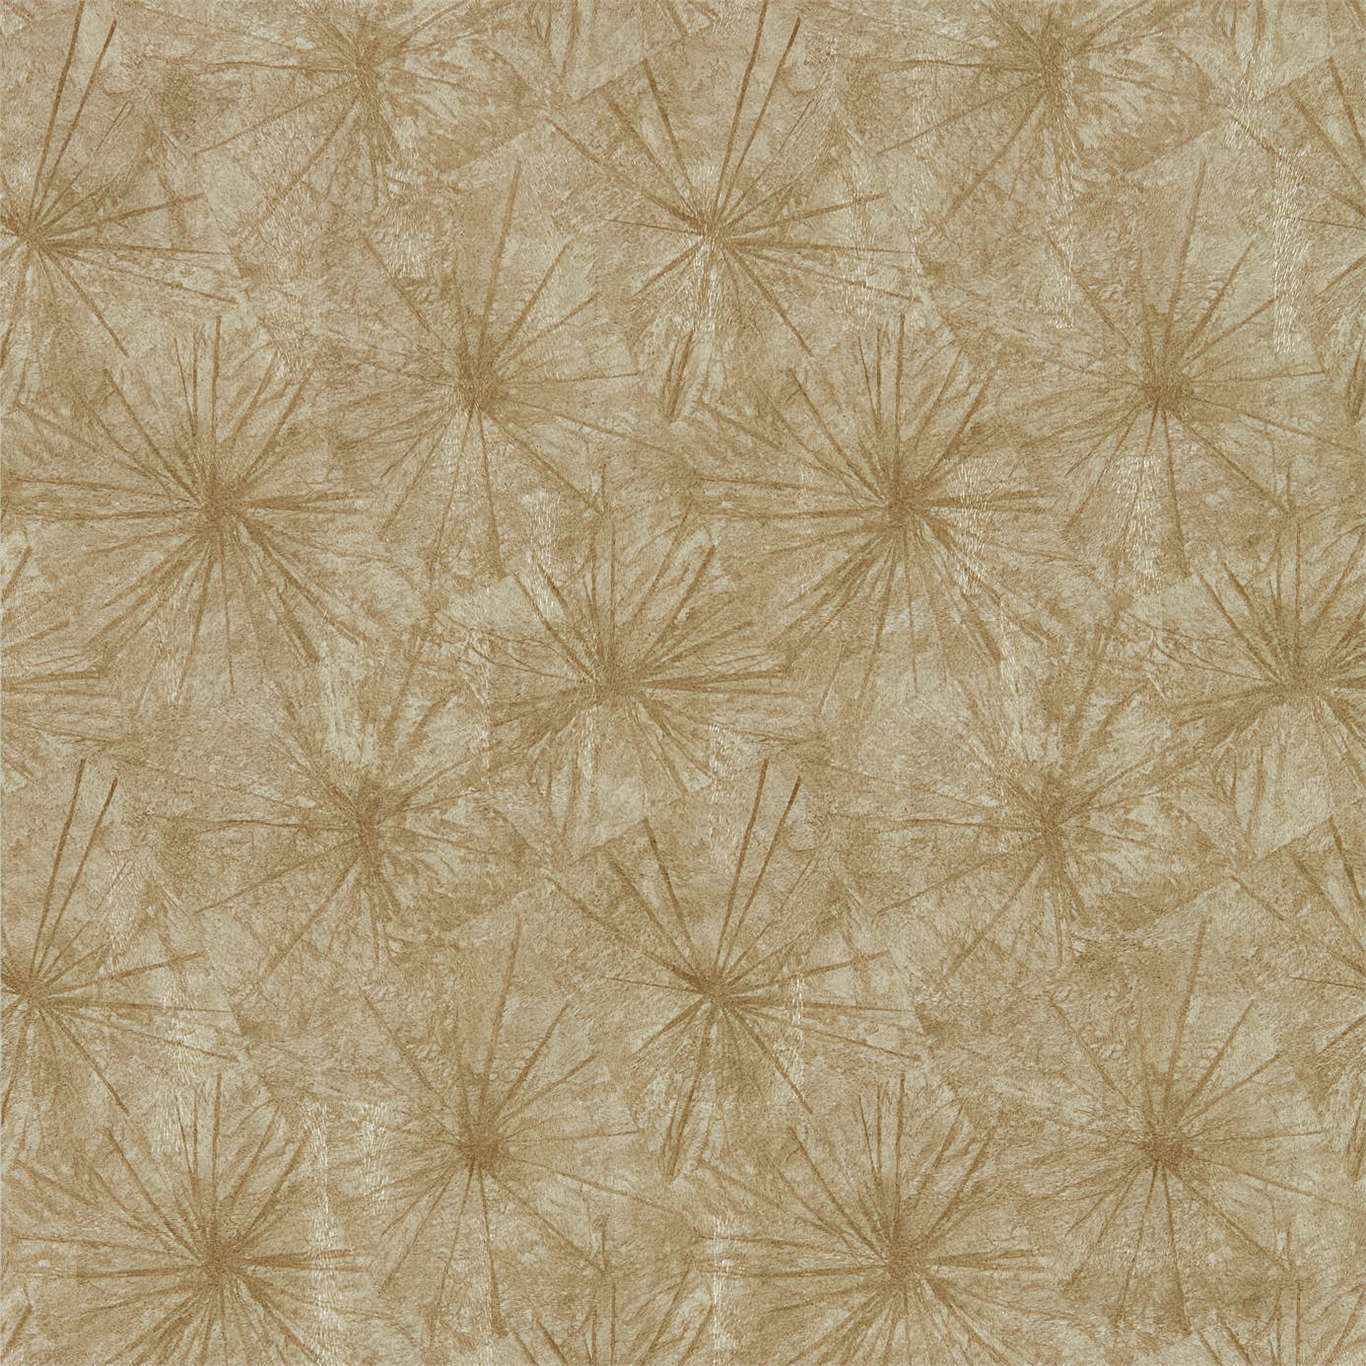 Anthology Illusion Gold/Sienna Wallpaper by HAR